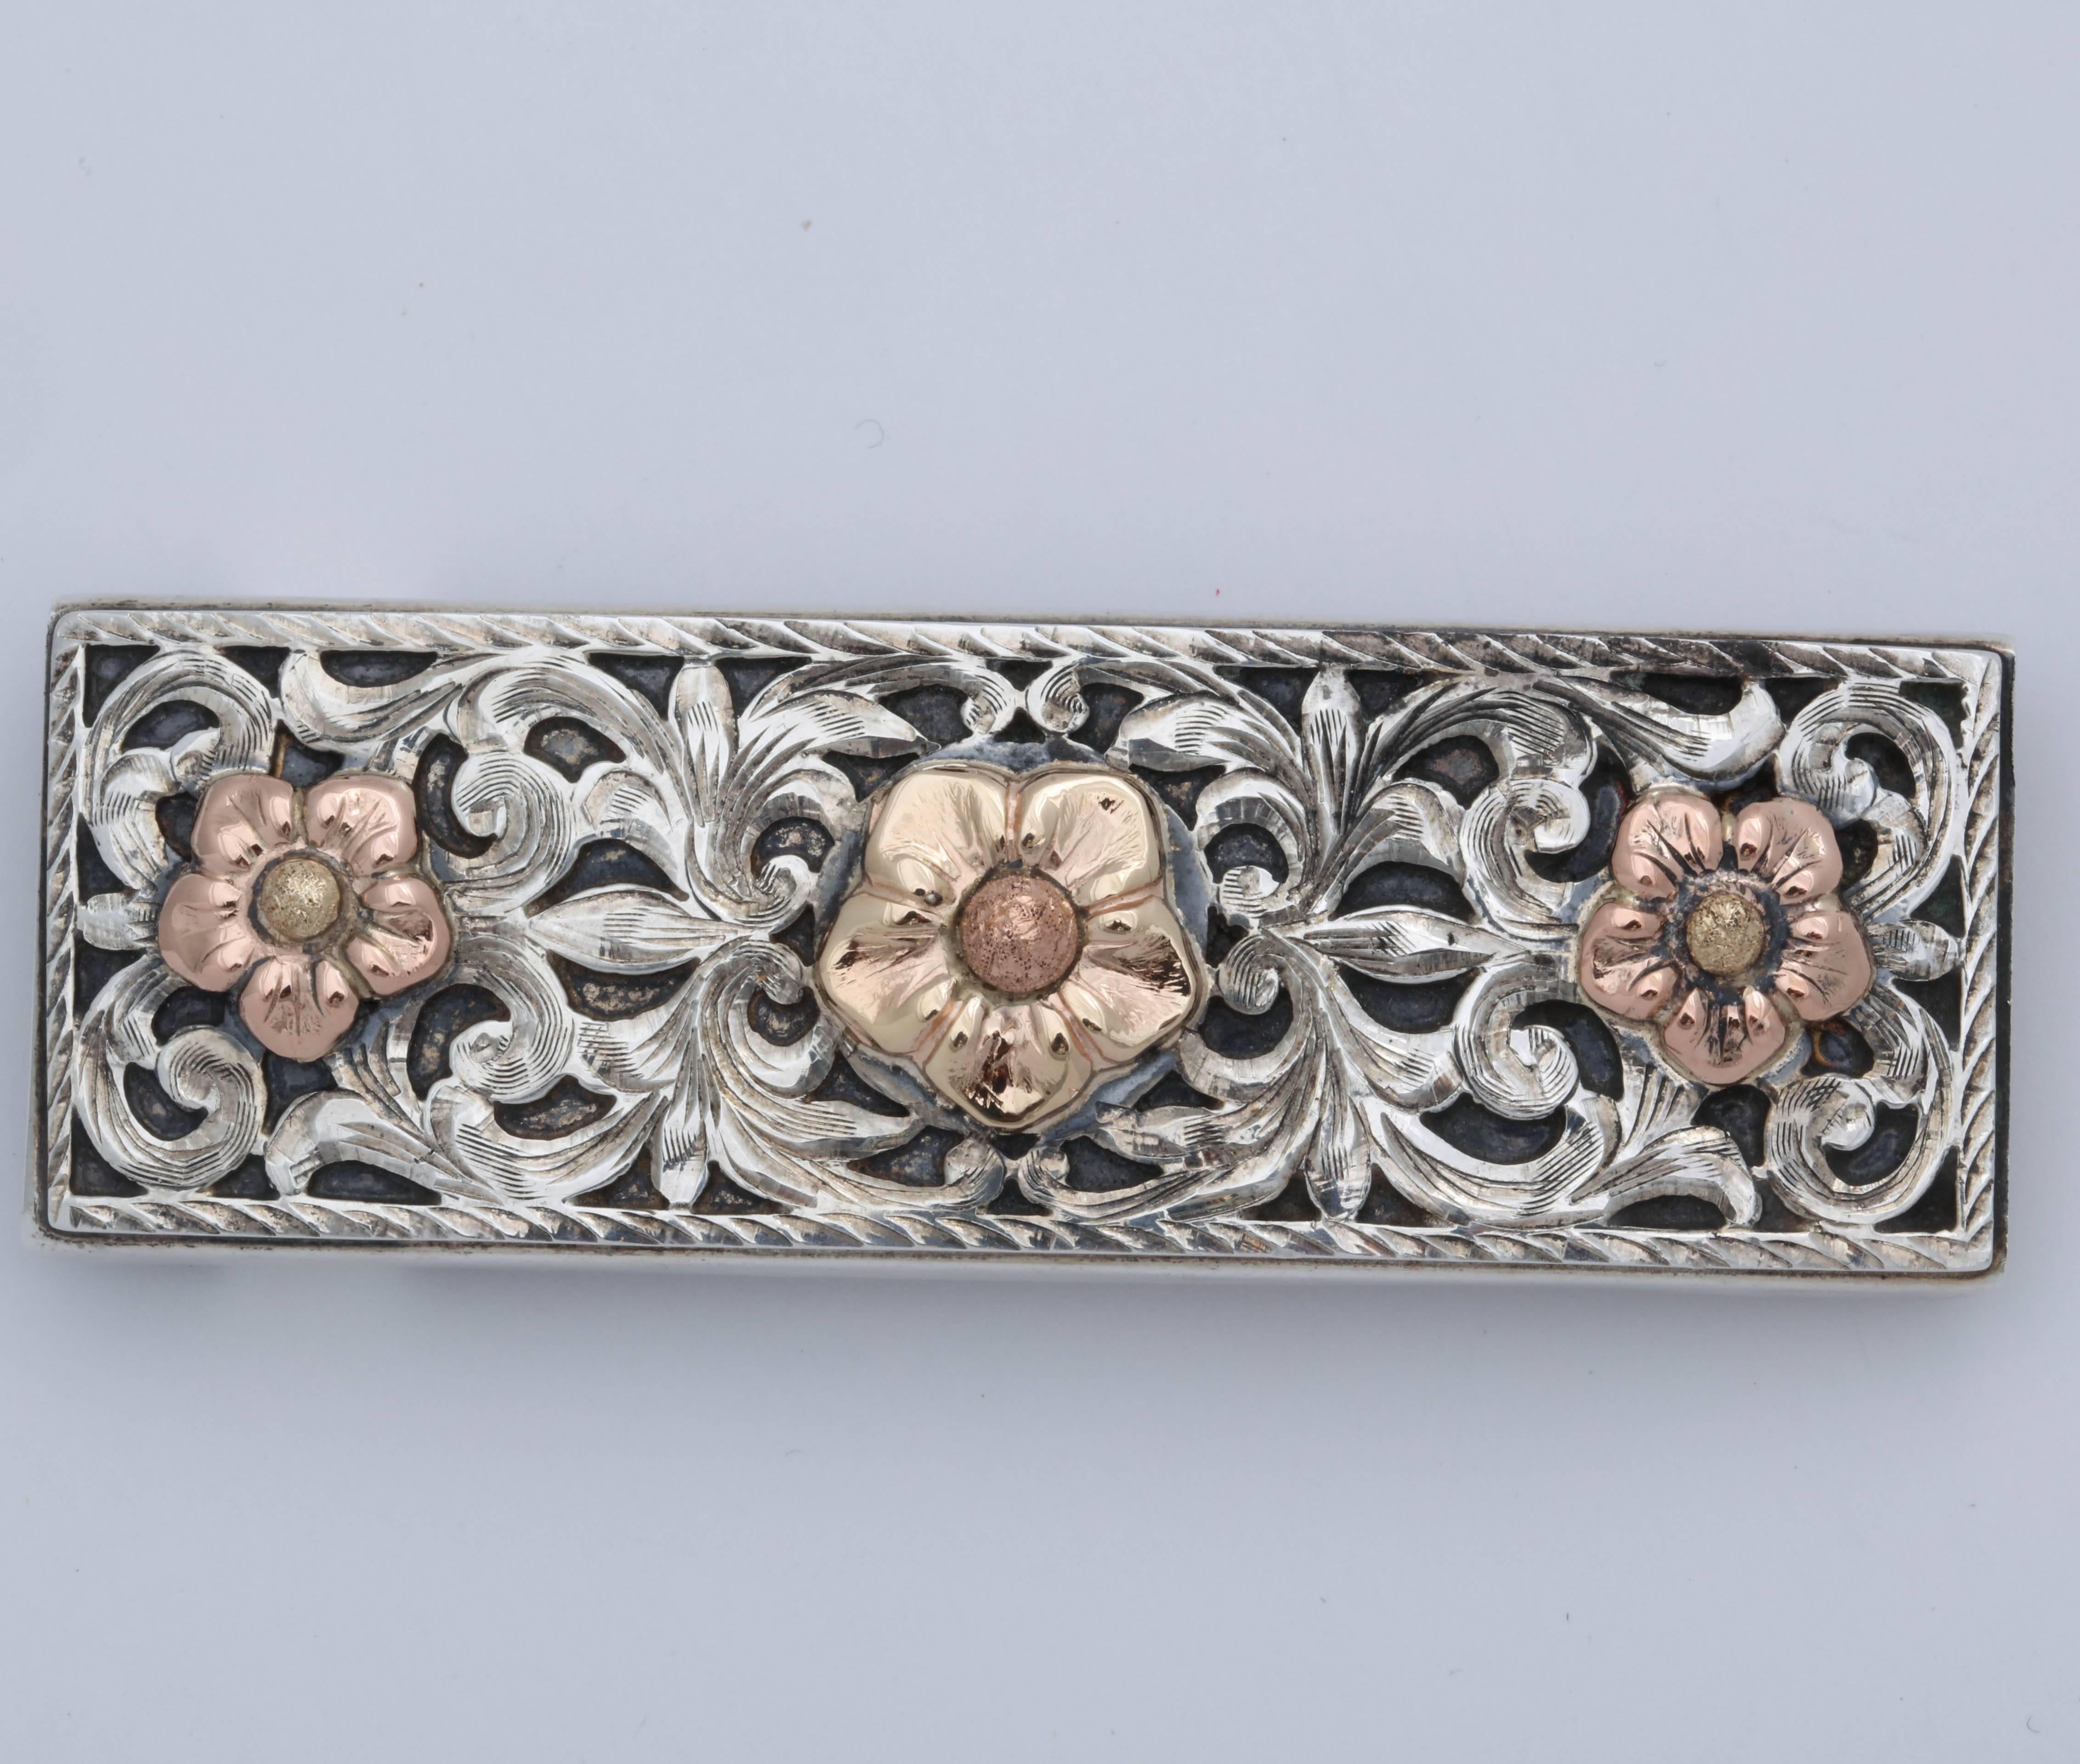 This beautiful belt buckle is hand engraved and hand made by Sun West . There are 2 layers of silver. The engraved first layer has 3 flowers applied in 14 kt rose gold and 14 kt yellow gold.  The second layer is oxidized  so that the engraved layer